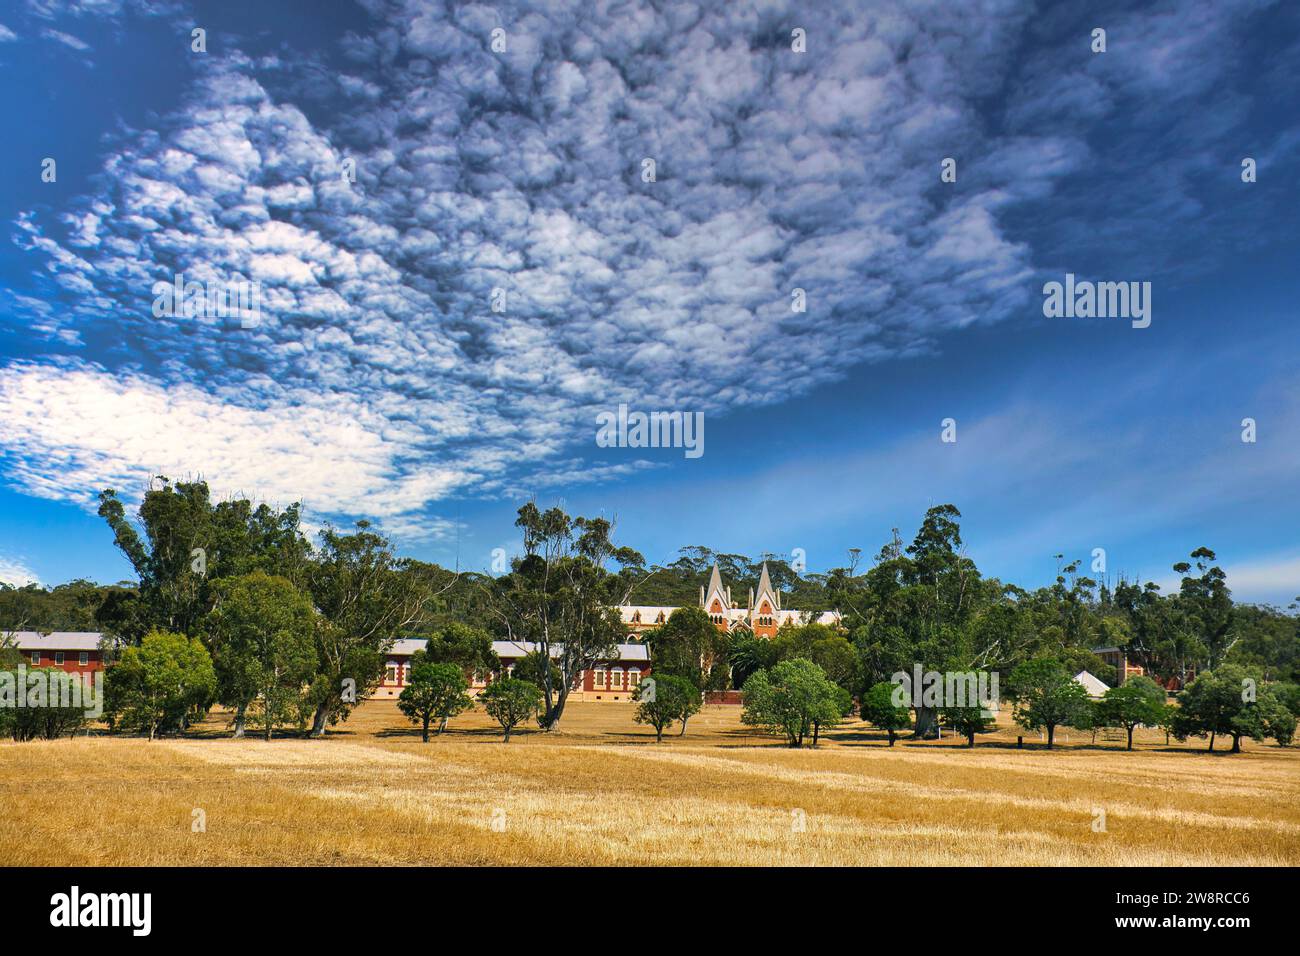 View of the monastic town of New Norcia, nestled between trees in the Western Australian wheat belt. Stock Photo